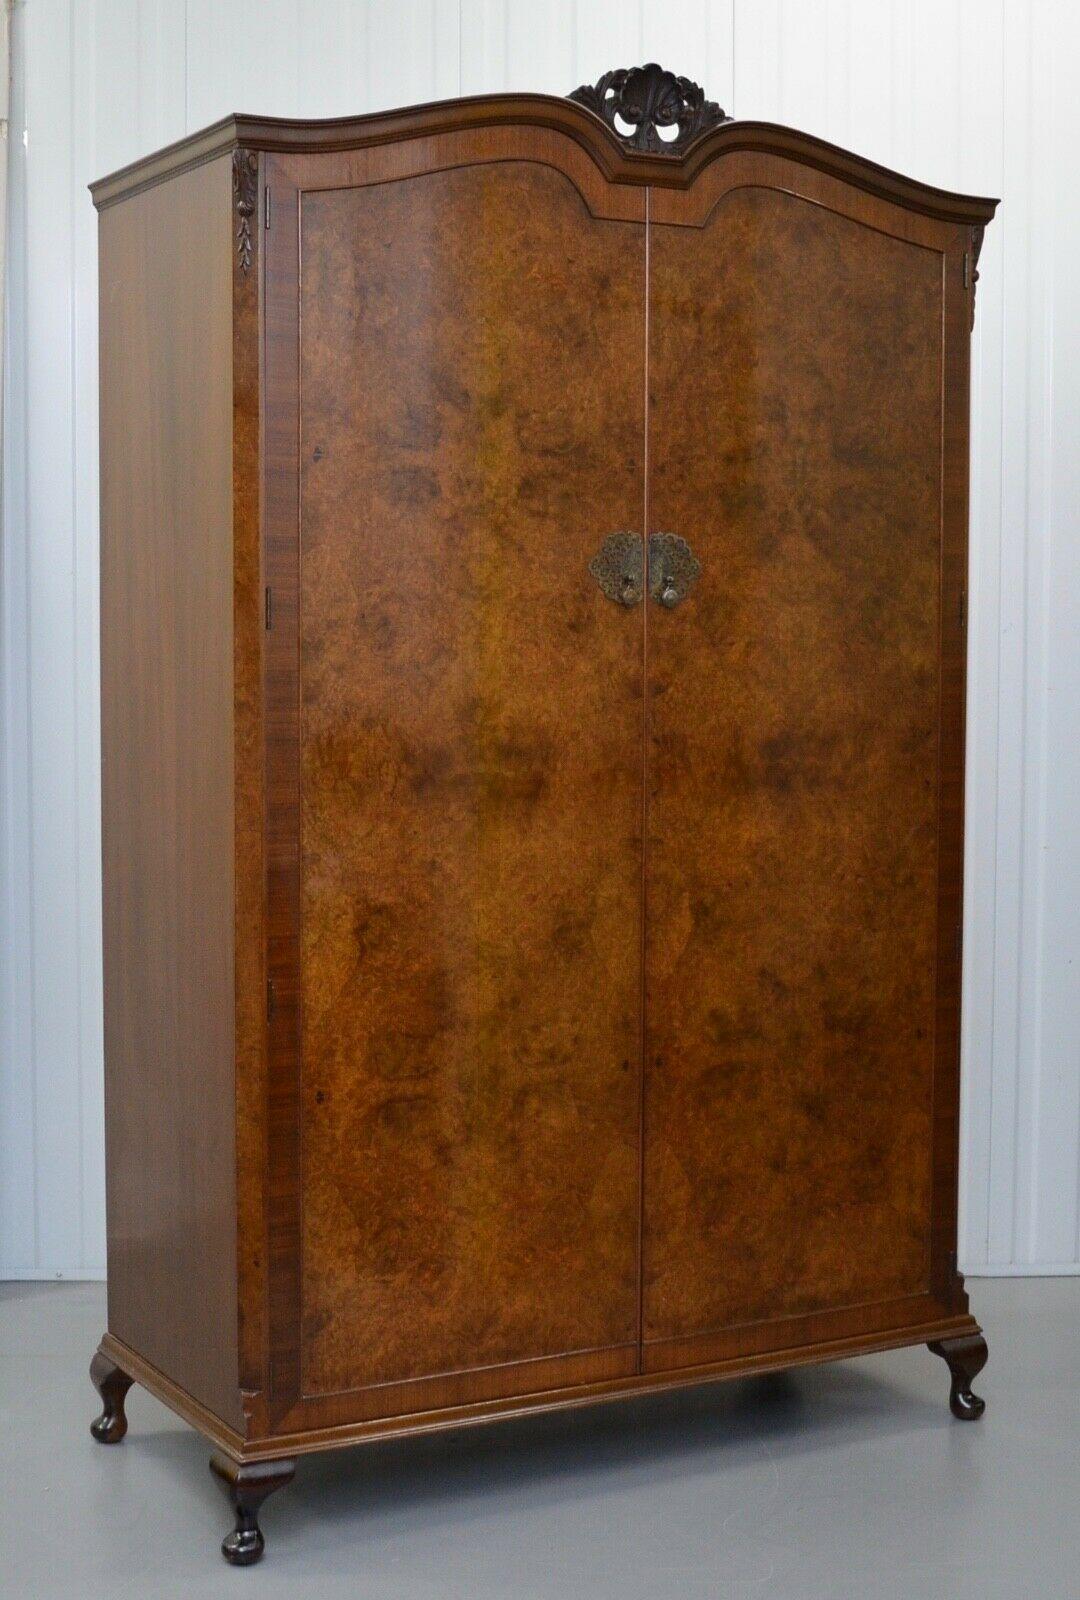 We are delighted to offer for sale this wonderful circa 1930 Art Deco heavily figured walnut double wardrobe. it is very functional offering two full-length hanging areas, and one shelf standing on short cabriole legs, and is in excellent